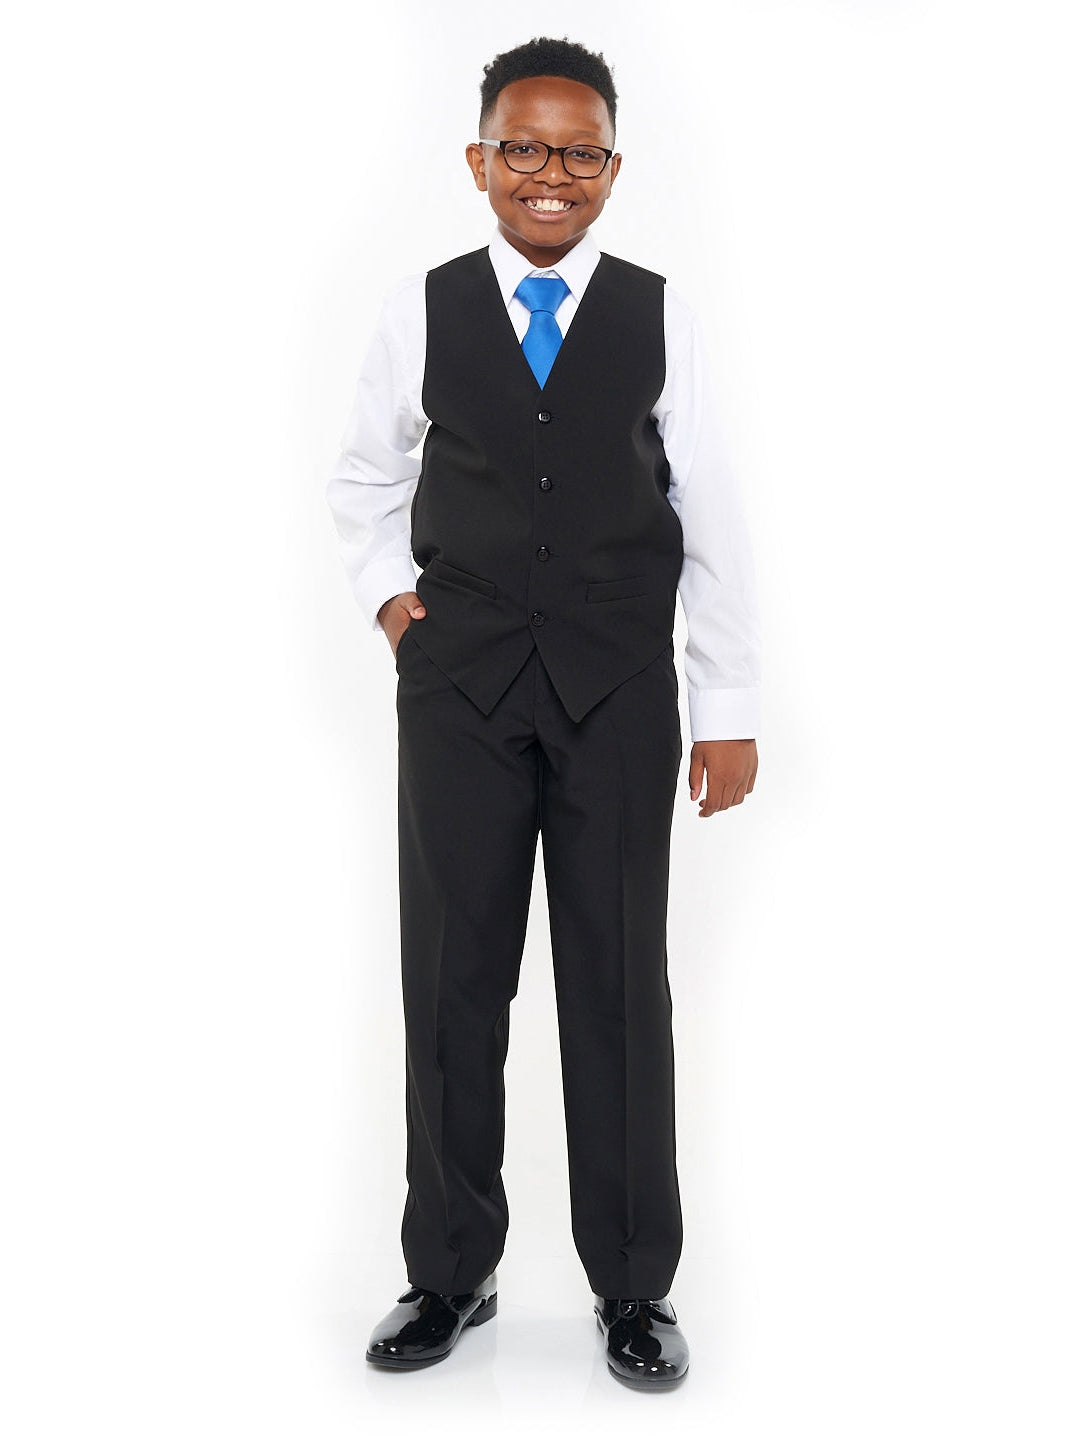 CHARLIE (Style #6705B) - Vest and Tie Ensemble Package - Boys